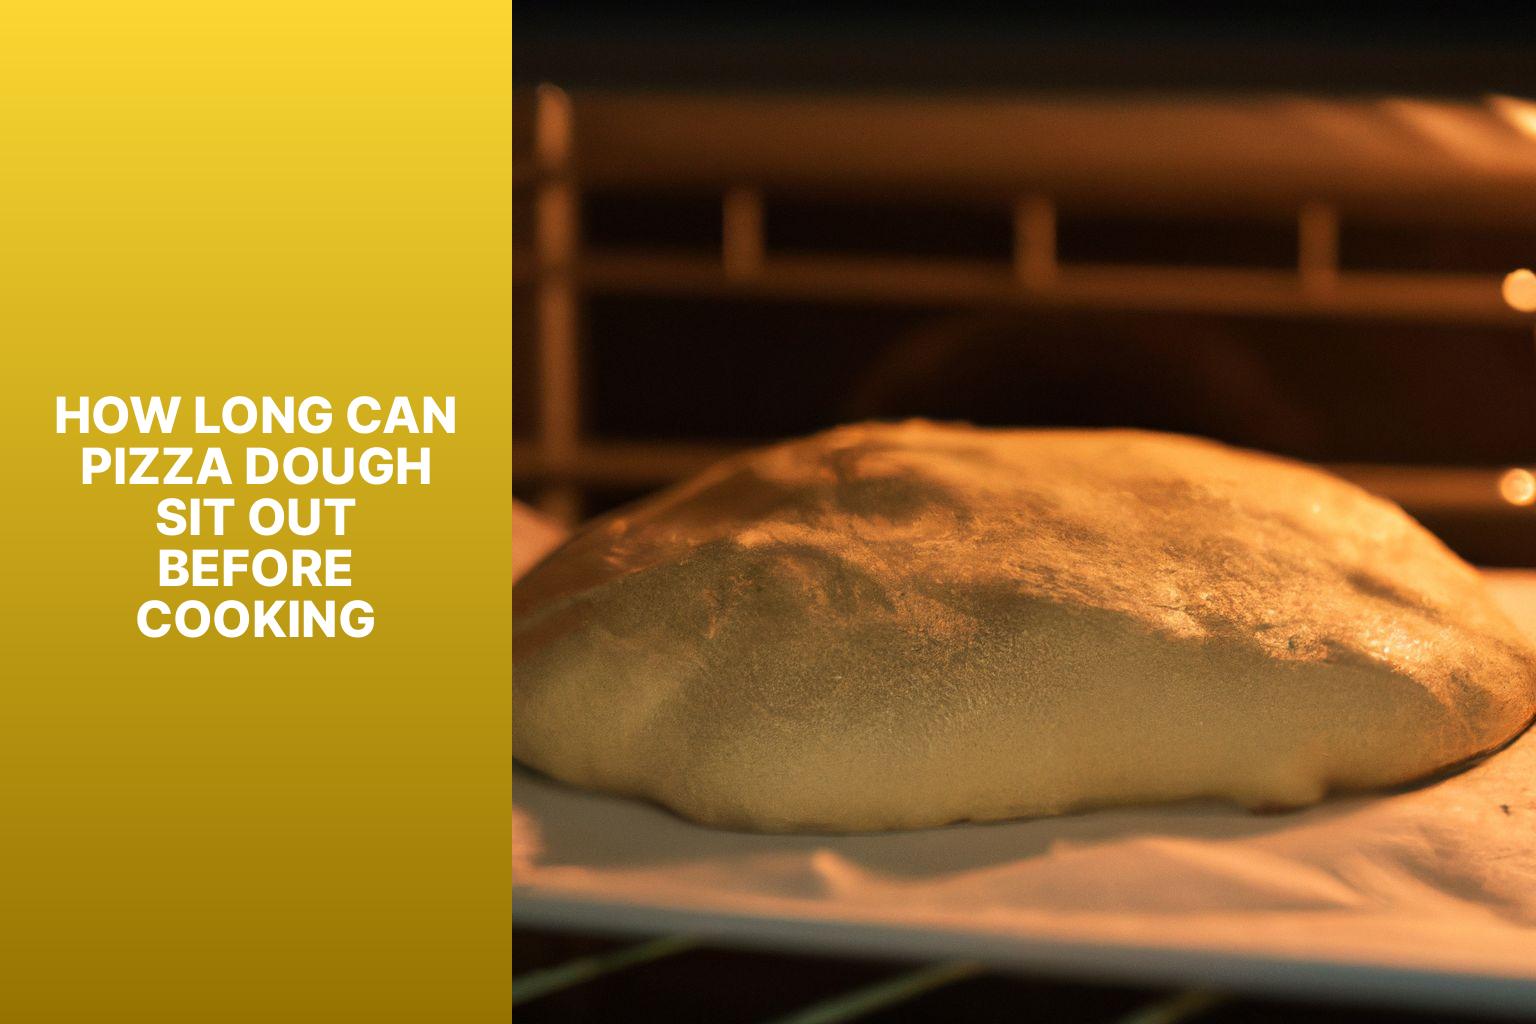 How Long Can Pizza Dough Sit Out Before Cooking